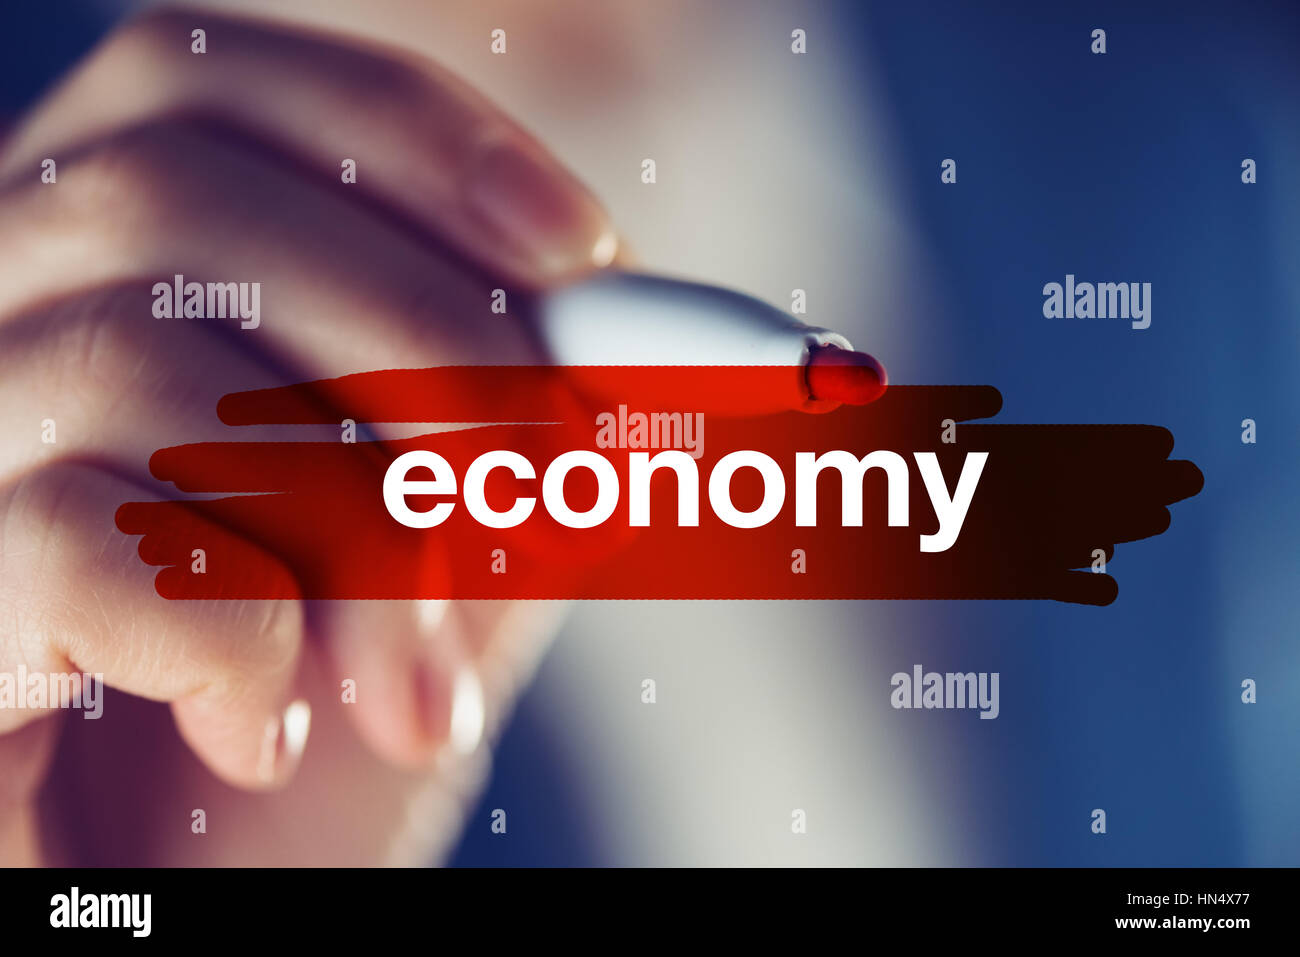 Business and economy concept, businesswoman highlighting word Stock Photo